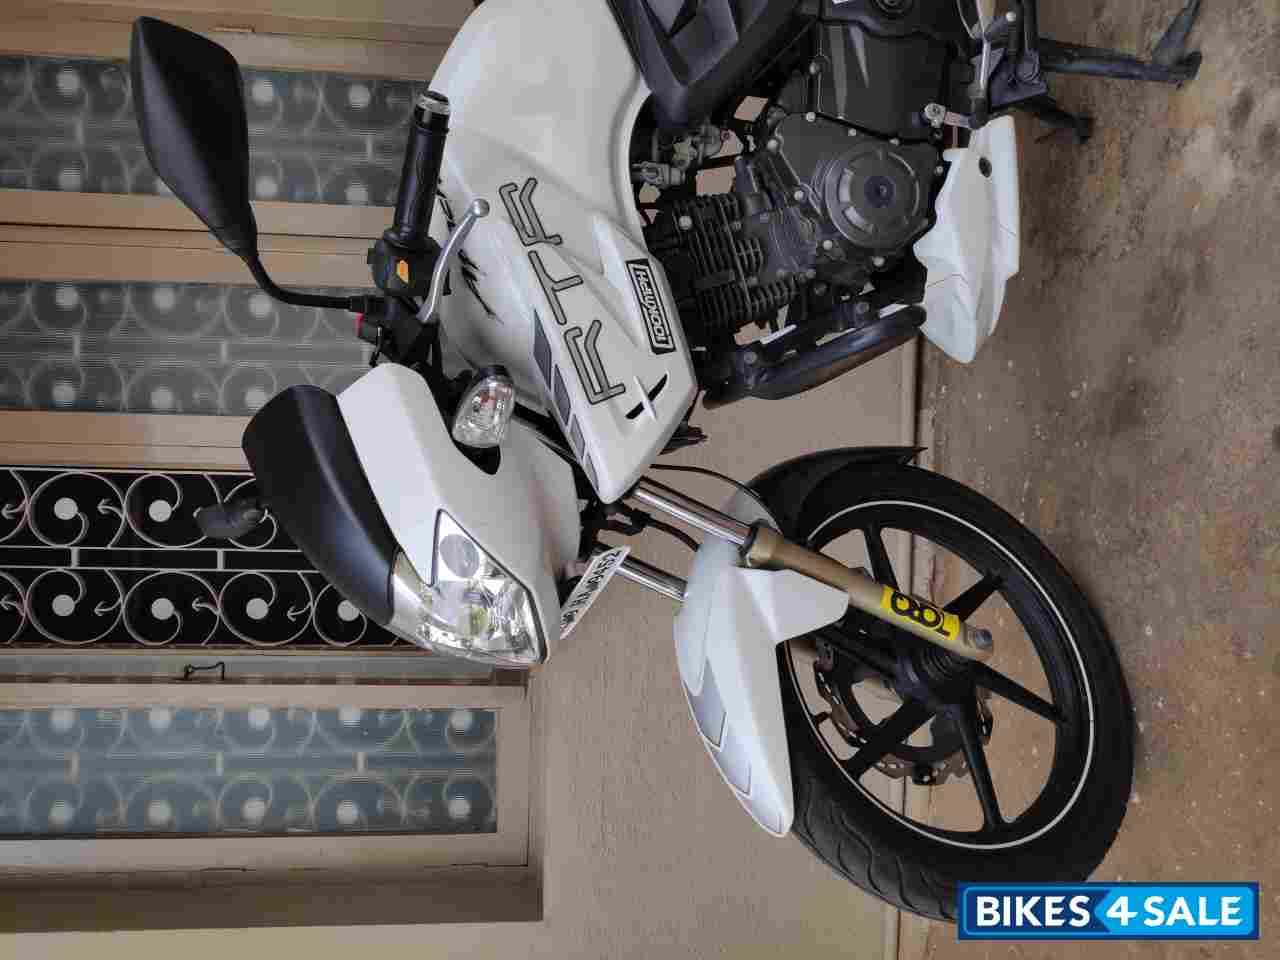 Used 2014 Model Tvs Apache Rtr 180 For Sale In Mysore Id 230603